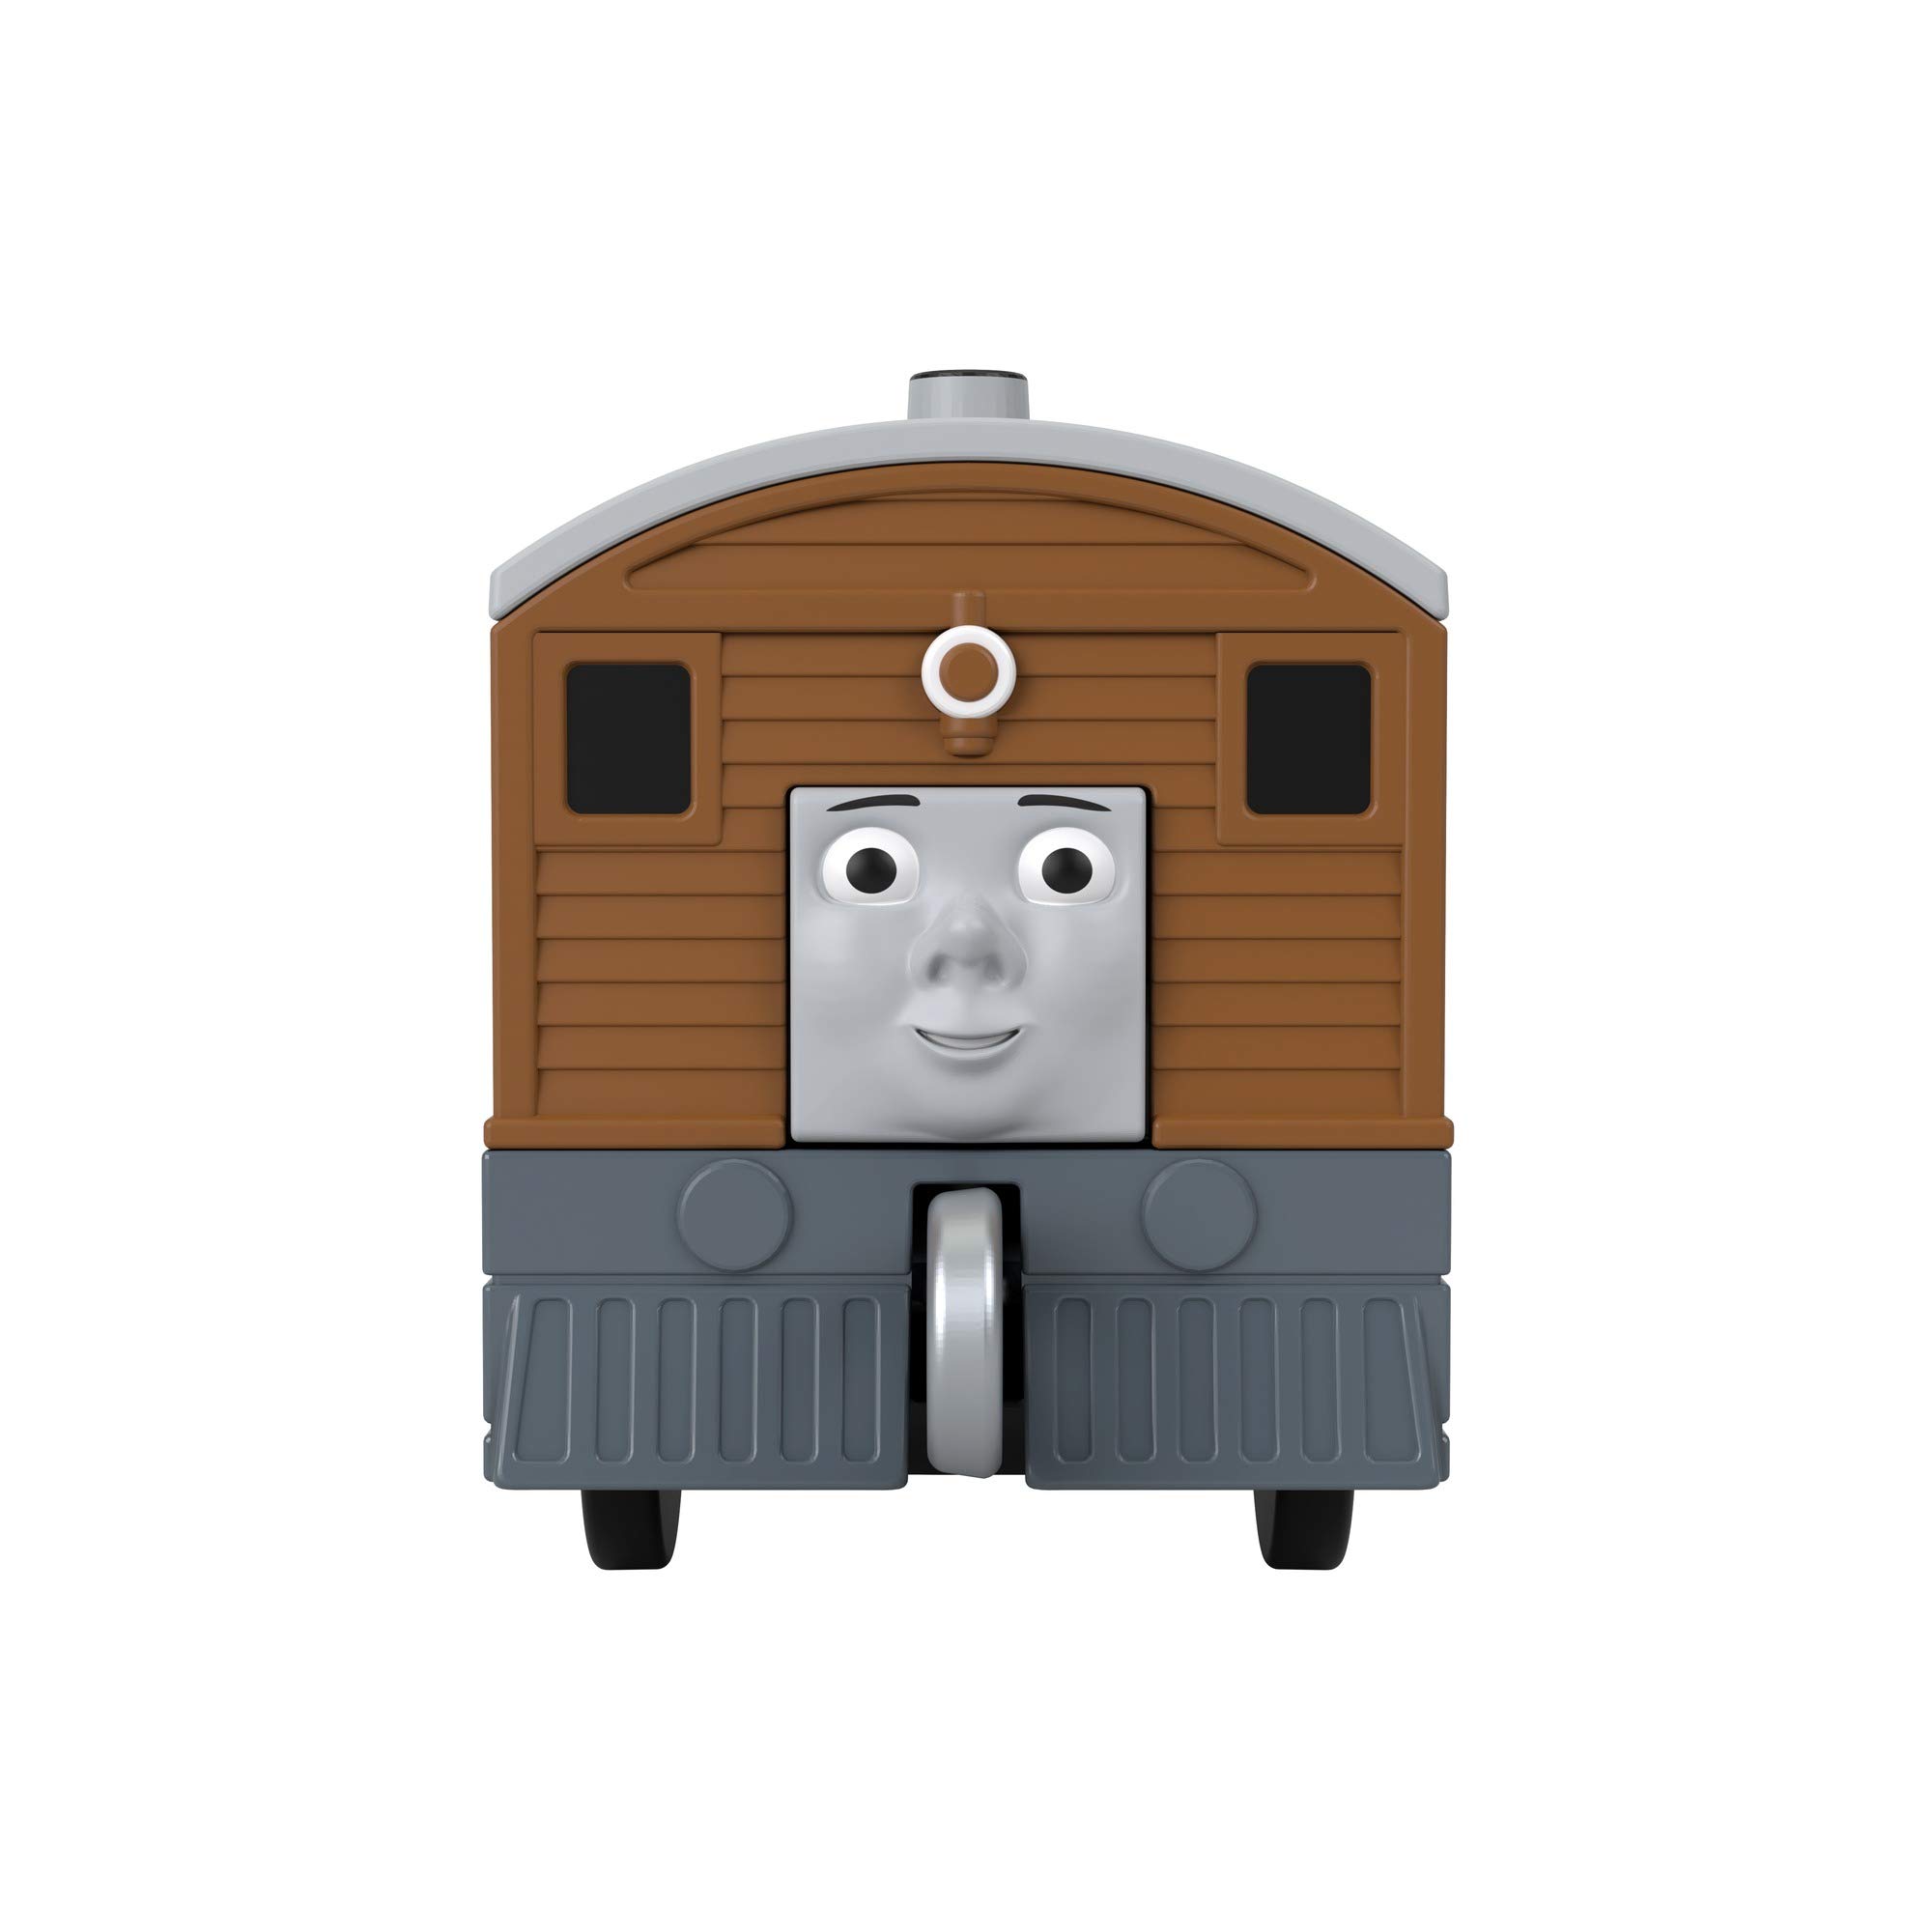 Thomas & Friends GHK63 Thomas and Friends Fisher-Price Toby, Multi-Colour